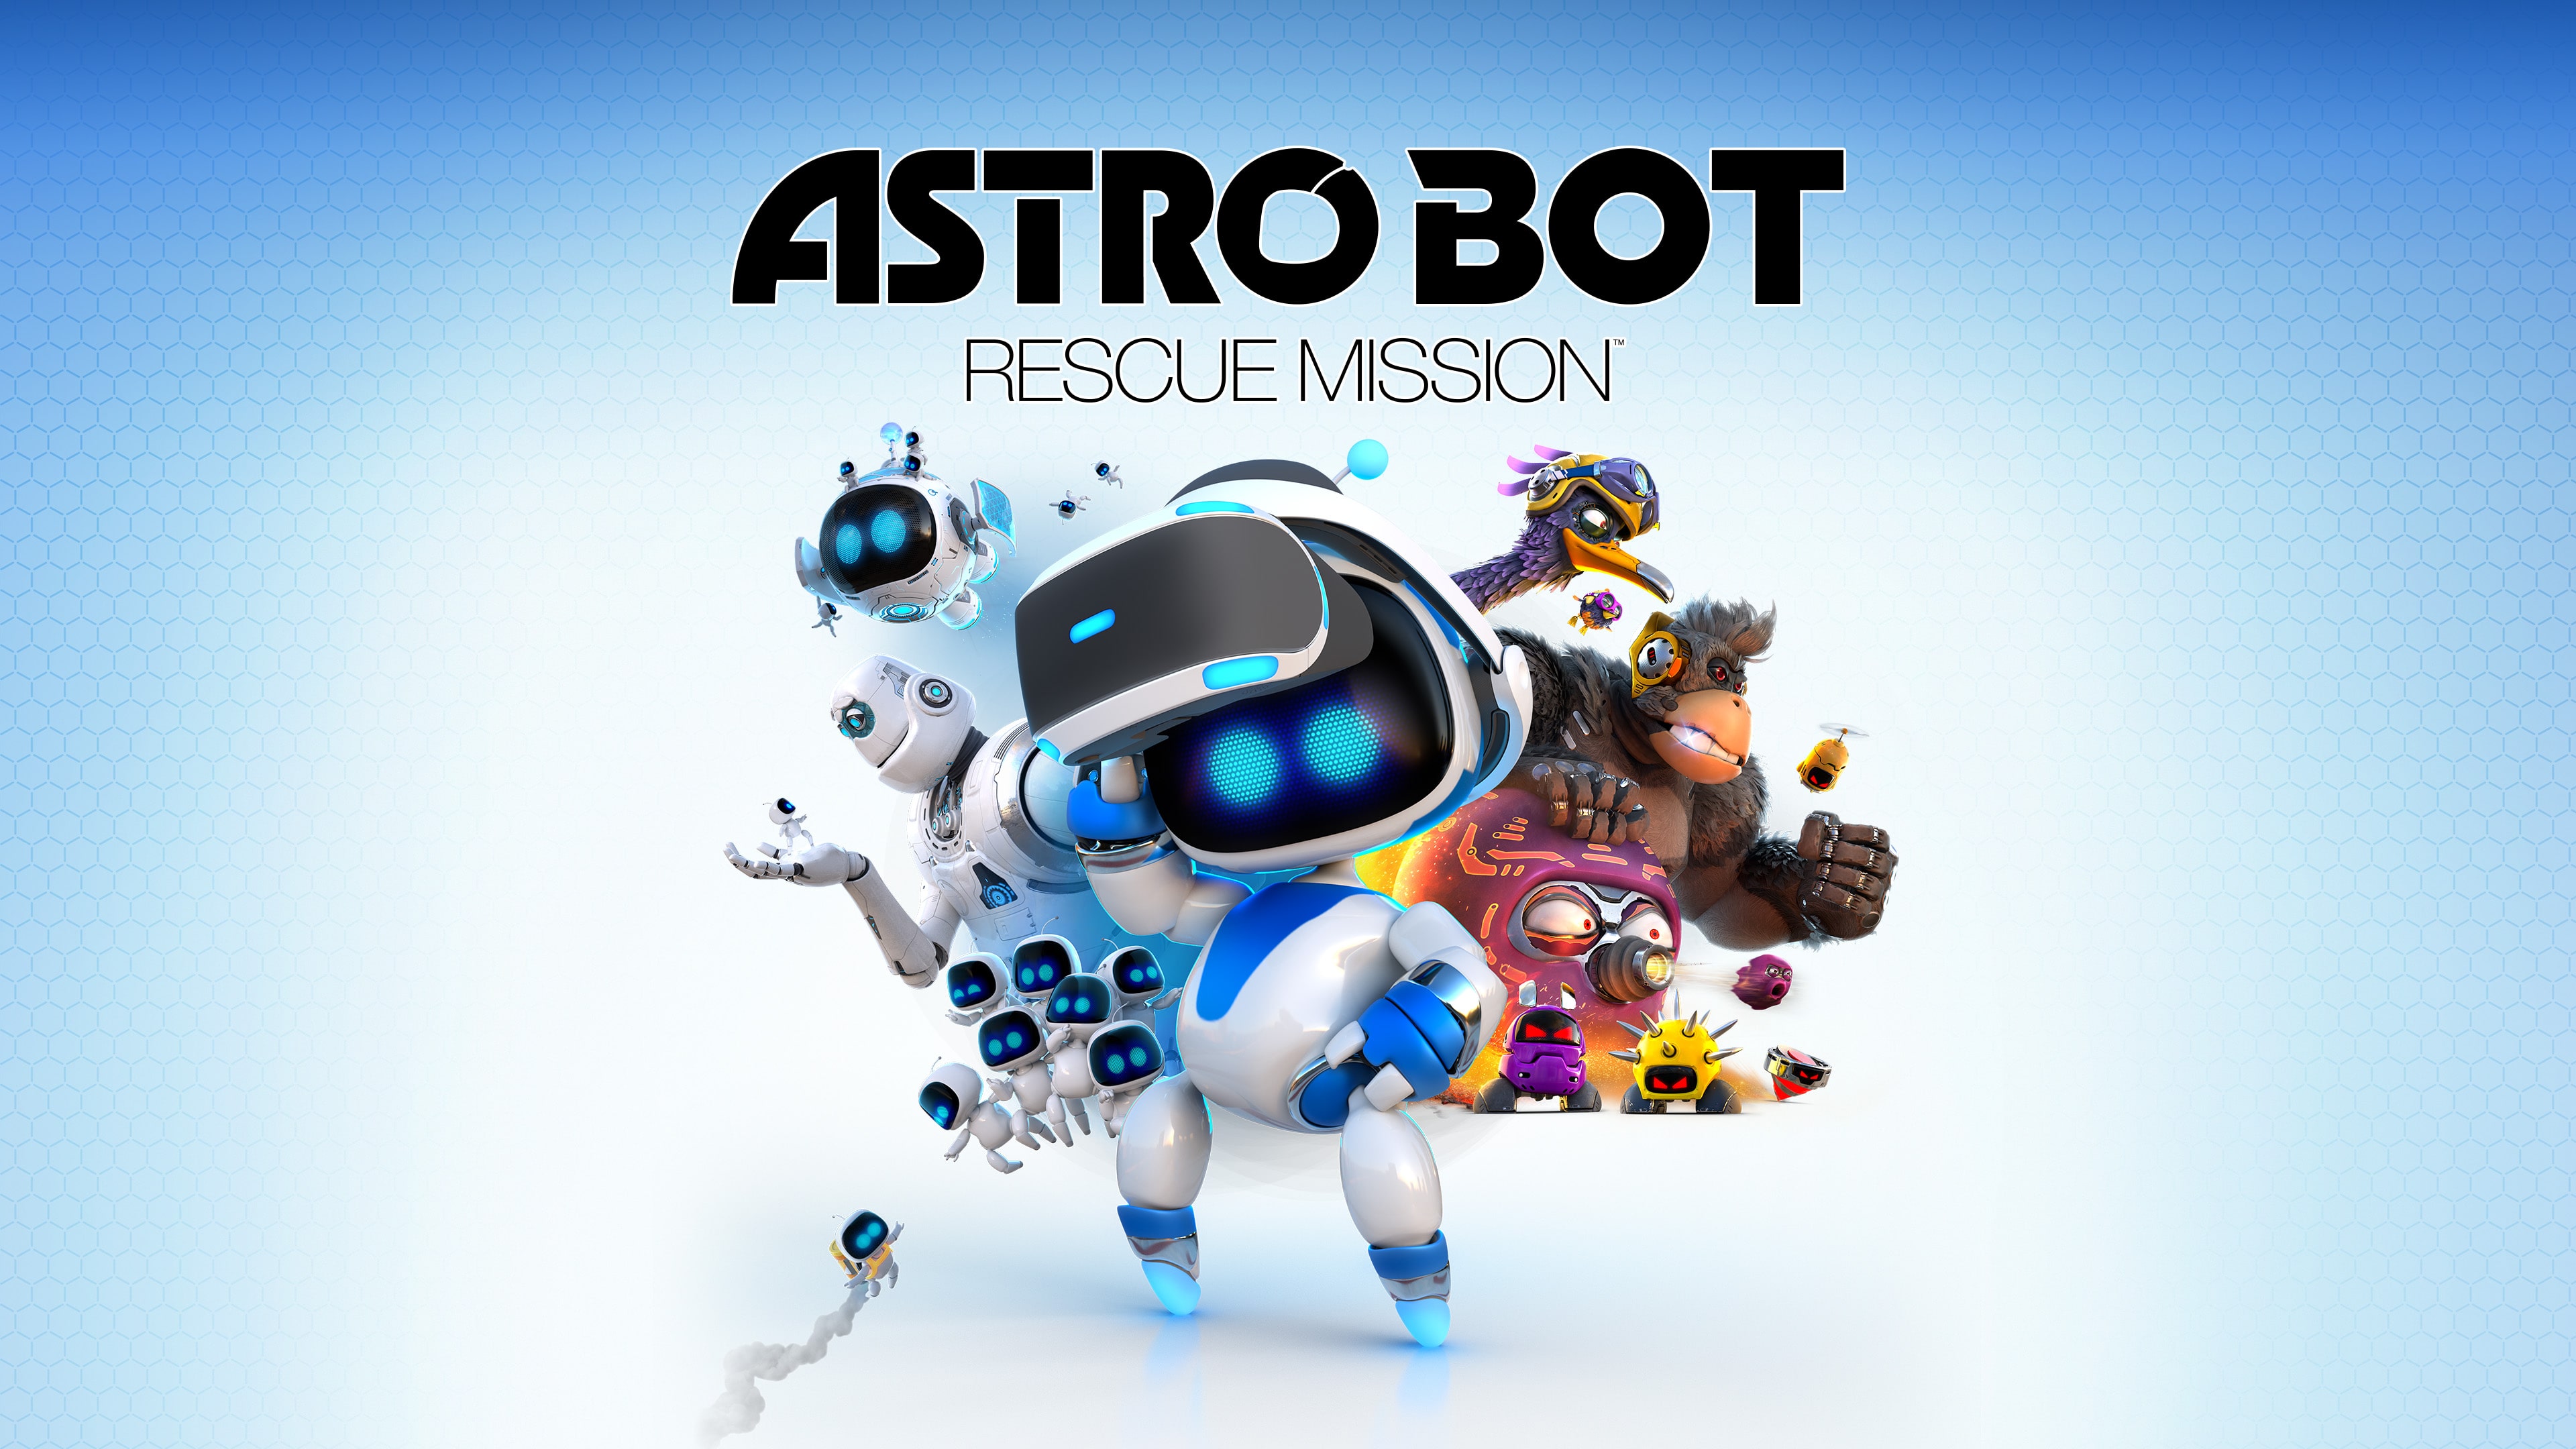 ASTRO BOT: RESCUE MISSION (Simplified Chinese, English, Korean, Thai, Japanese, Traditional Chinese)